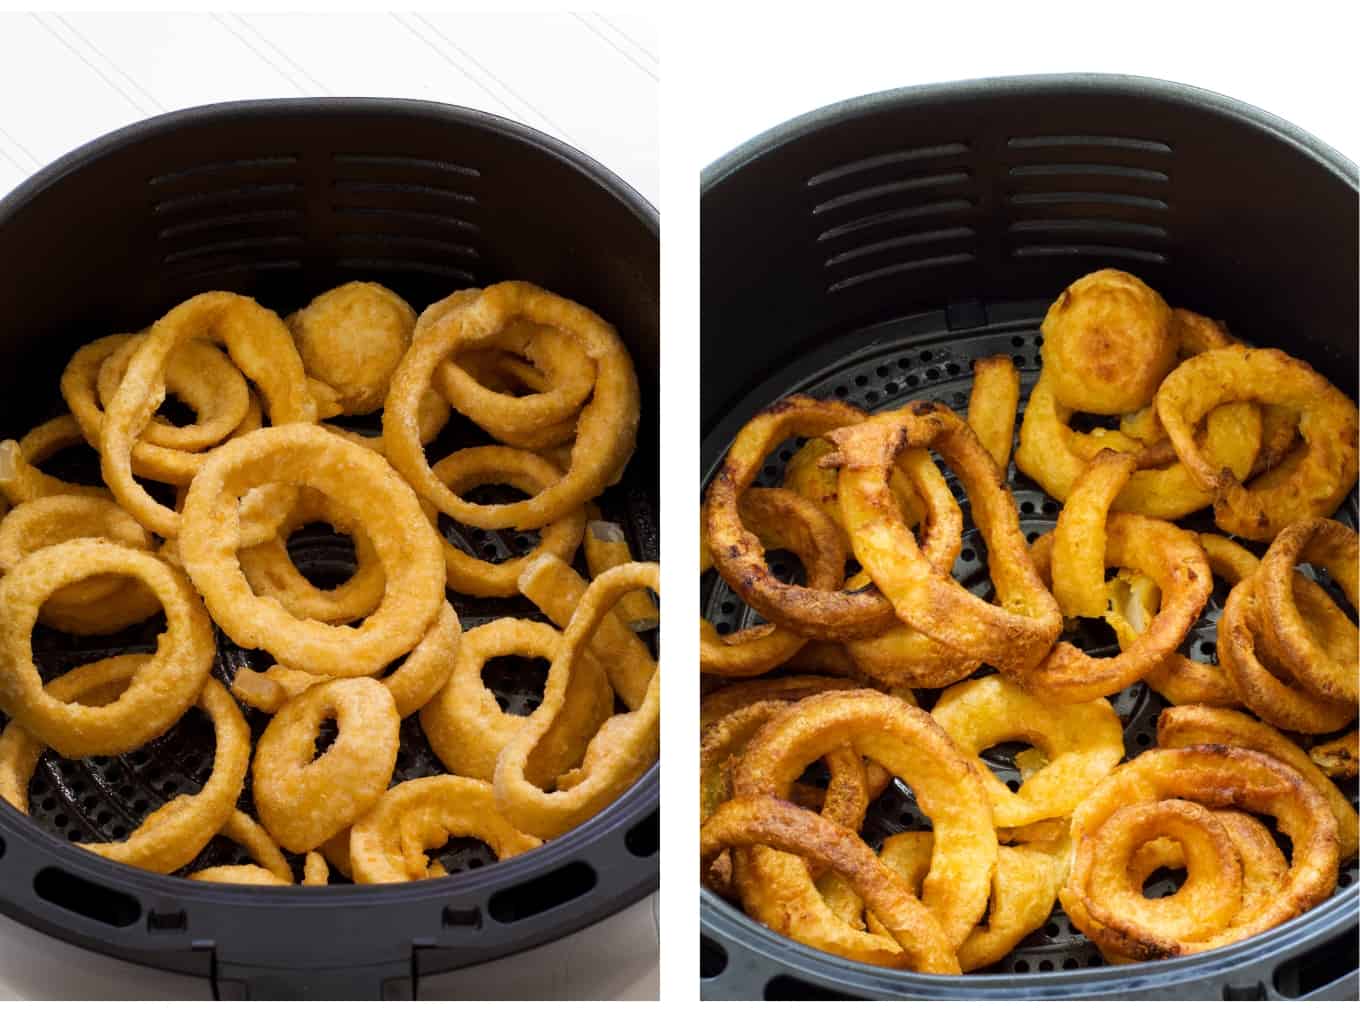 Side by side images of the onion rings in the air fryer basket, the one on the left is uncooked and the one on the right are cooked.